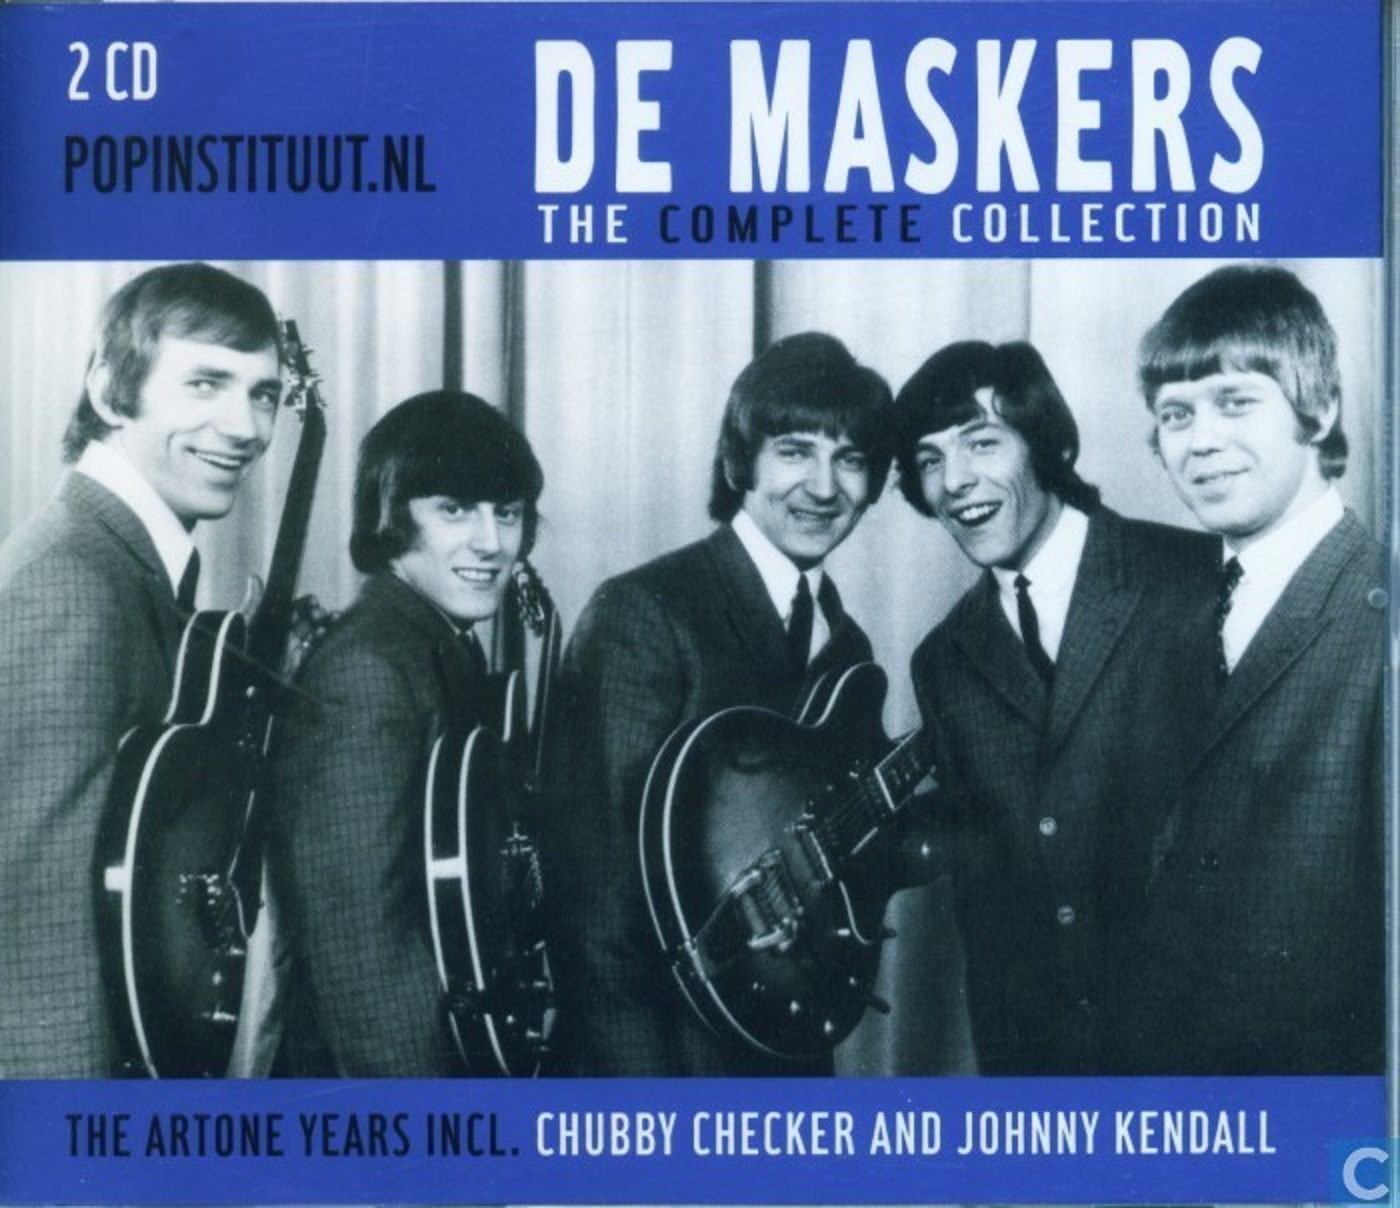 De Maskers - The complete collection (2CD)